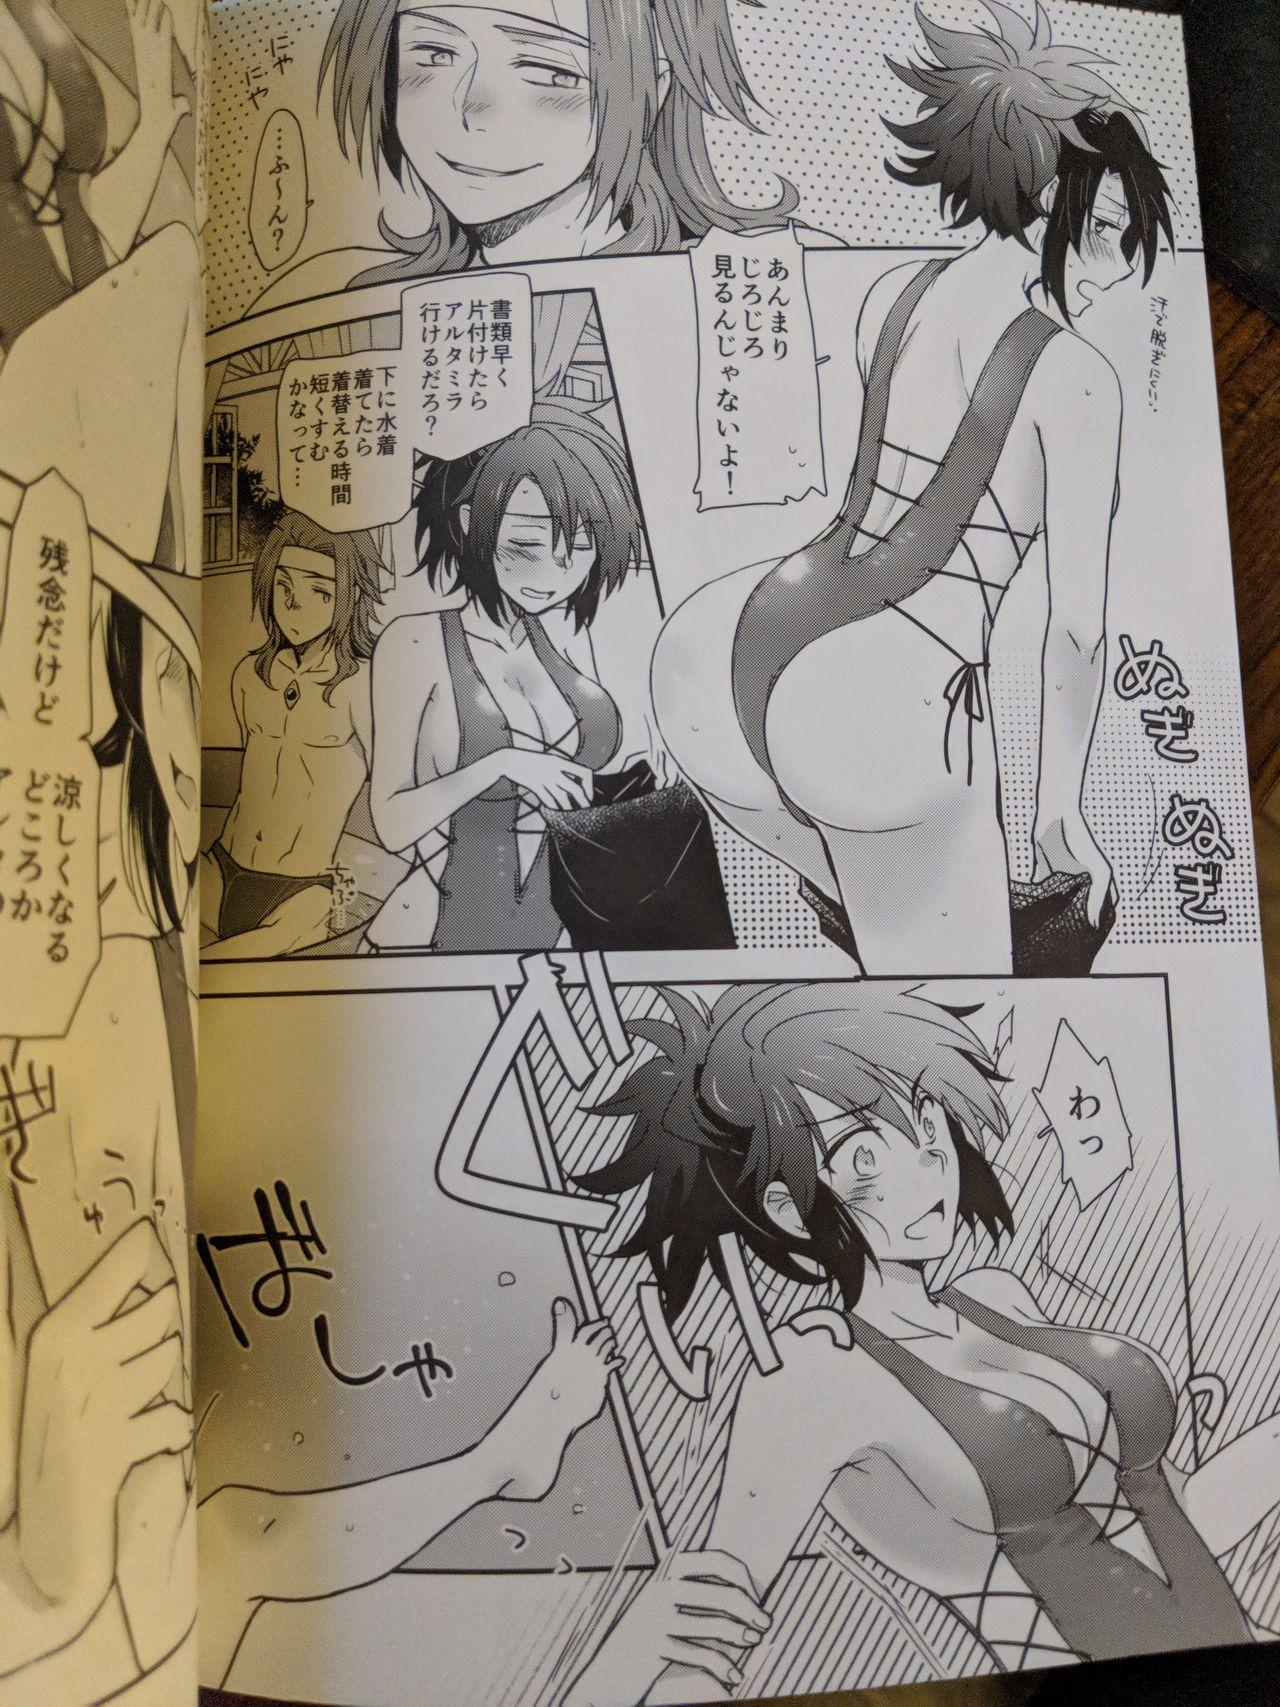 Load 彼女が水着にきがえたら - Tales of symphonia Behind - Page 7